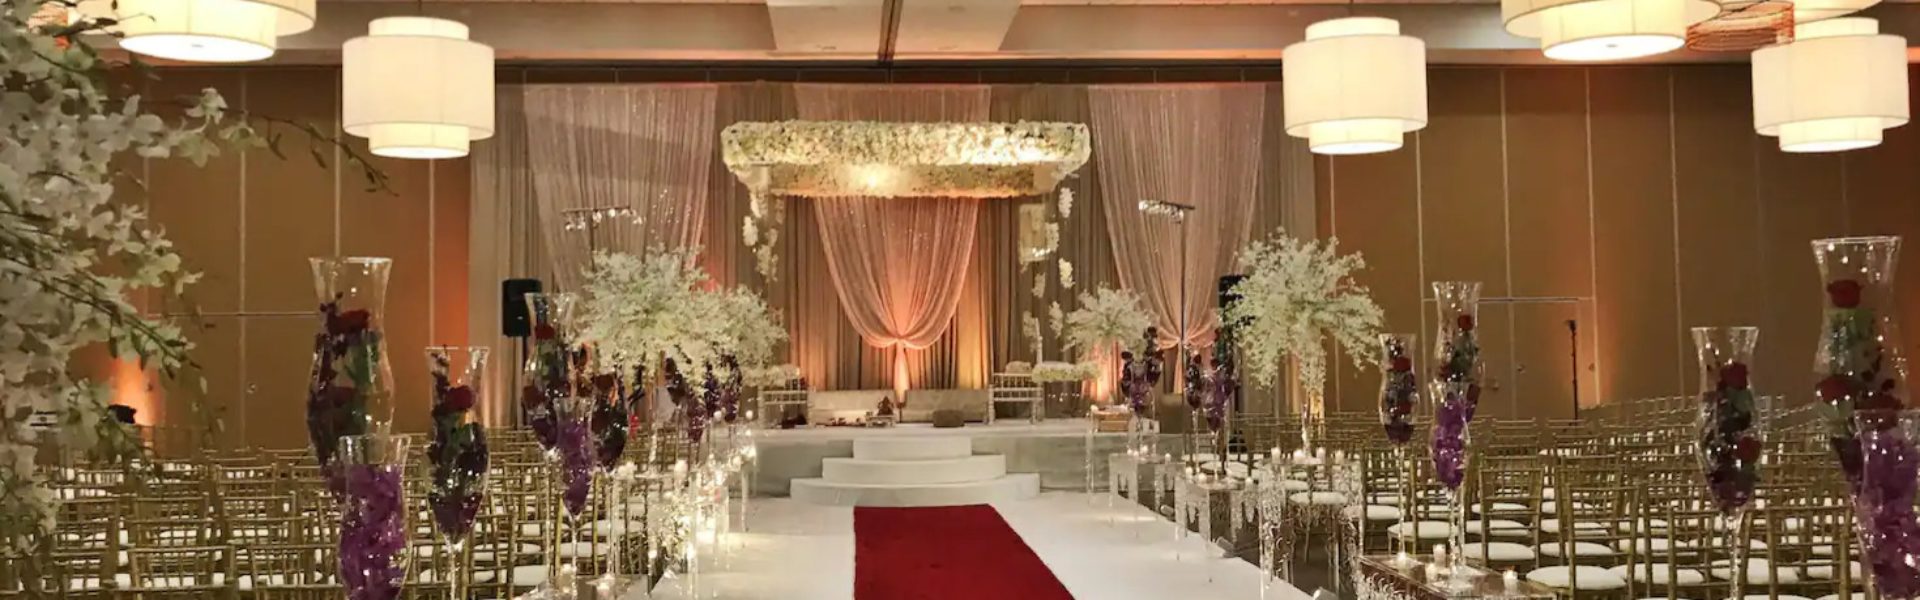 Naperville South Asian wedding ceremony